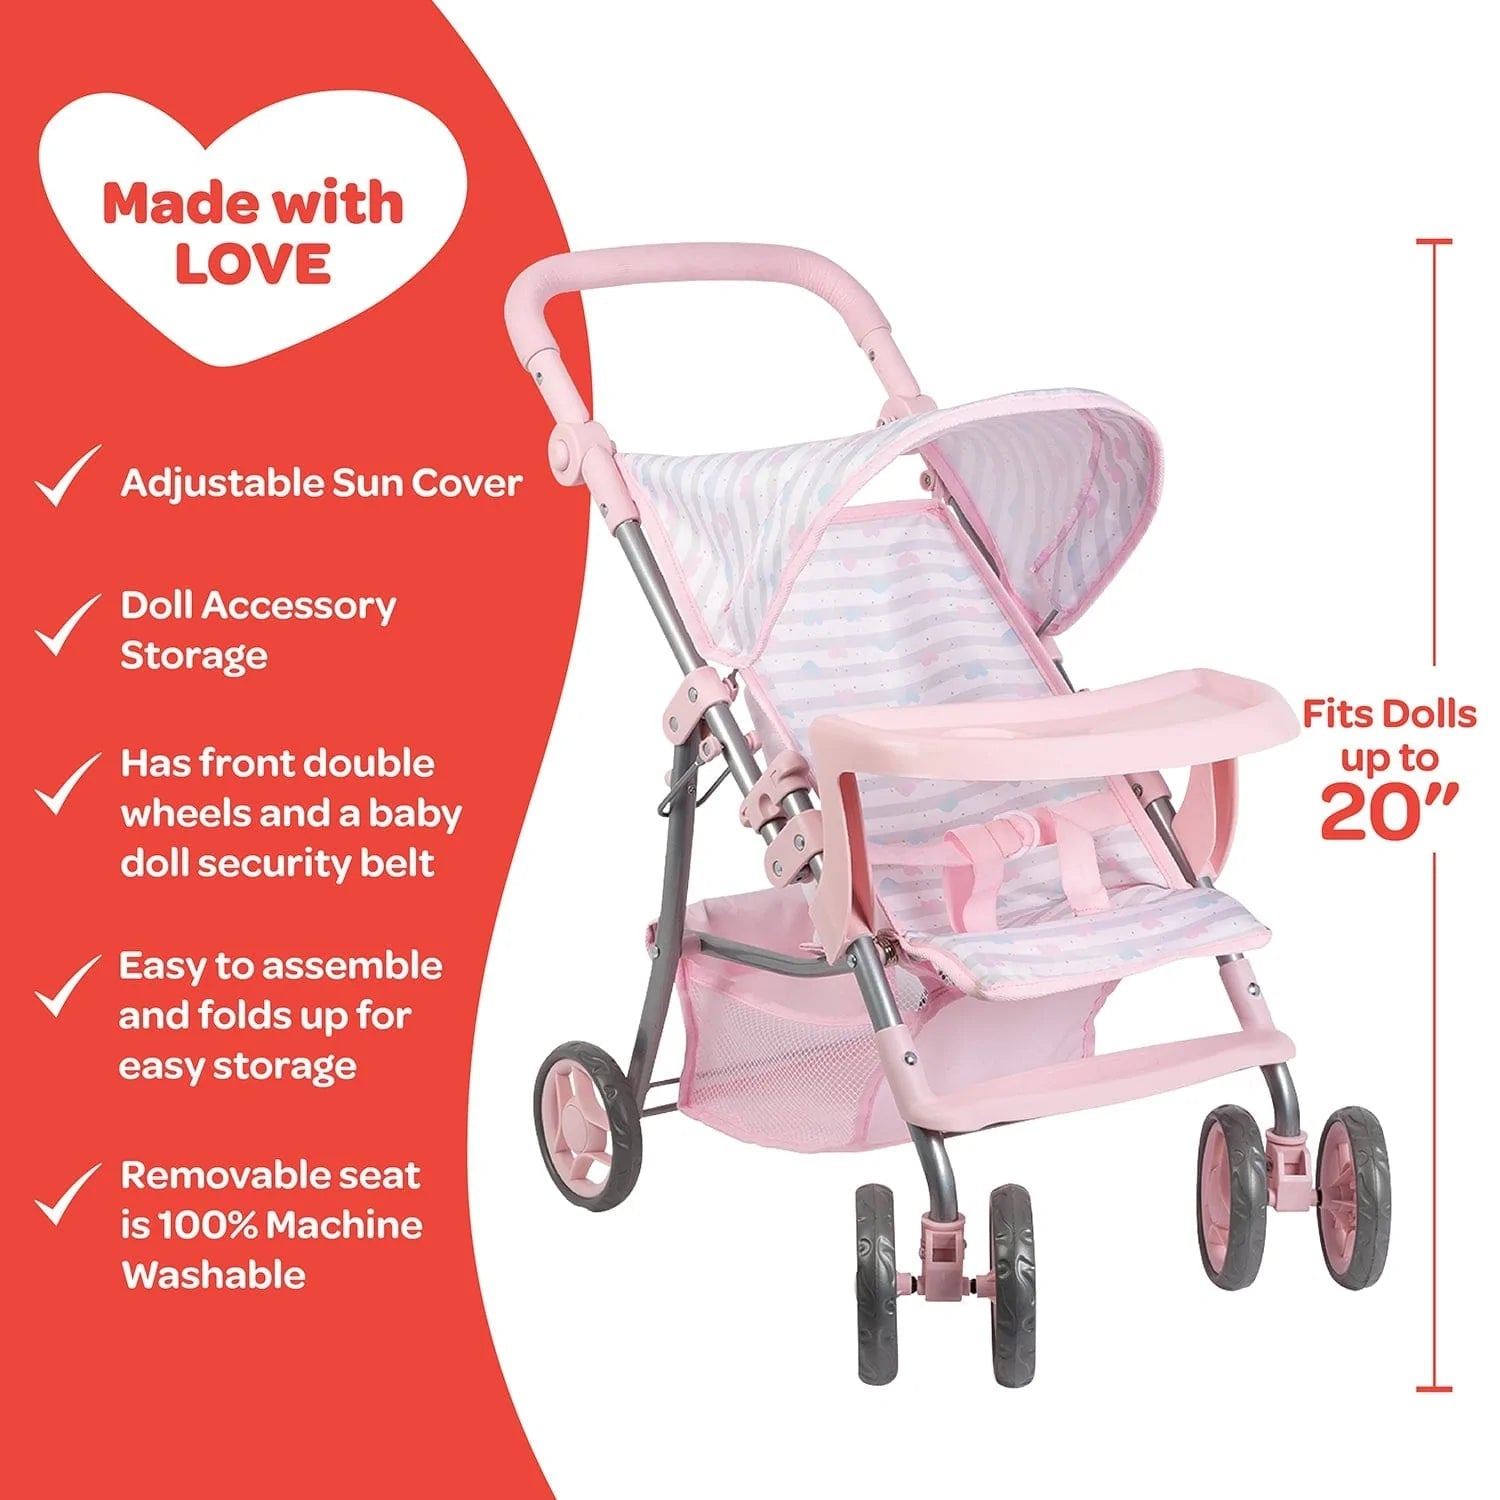 Adora Rainbow Rose Snack and Go Stroller - ANB Baby -010475230604$50 - $75